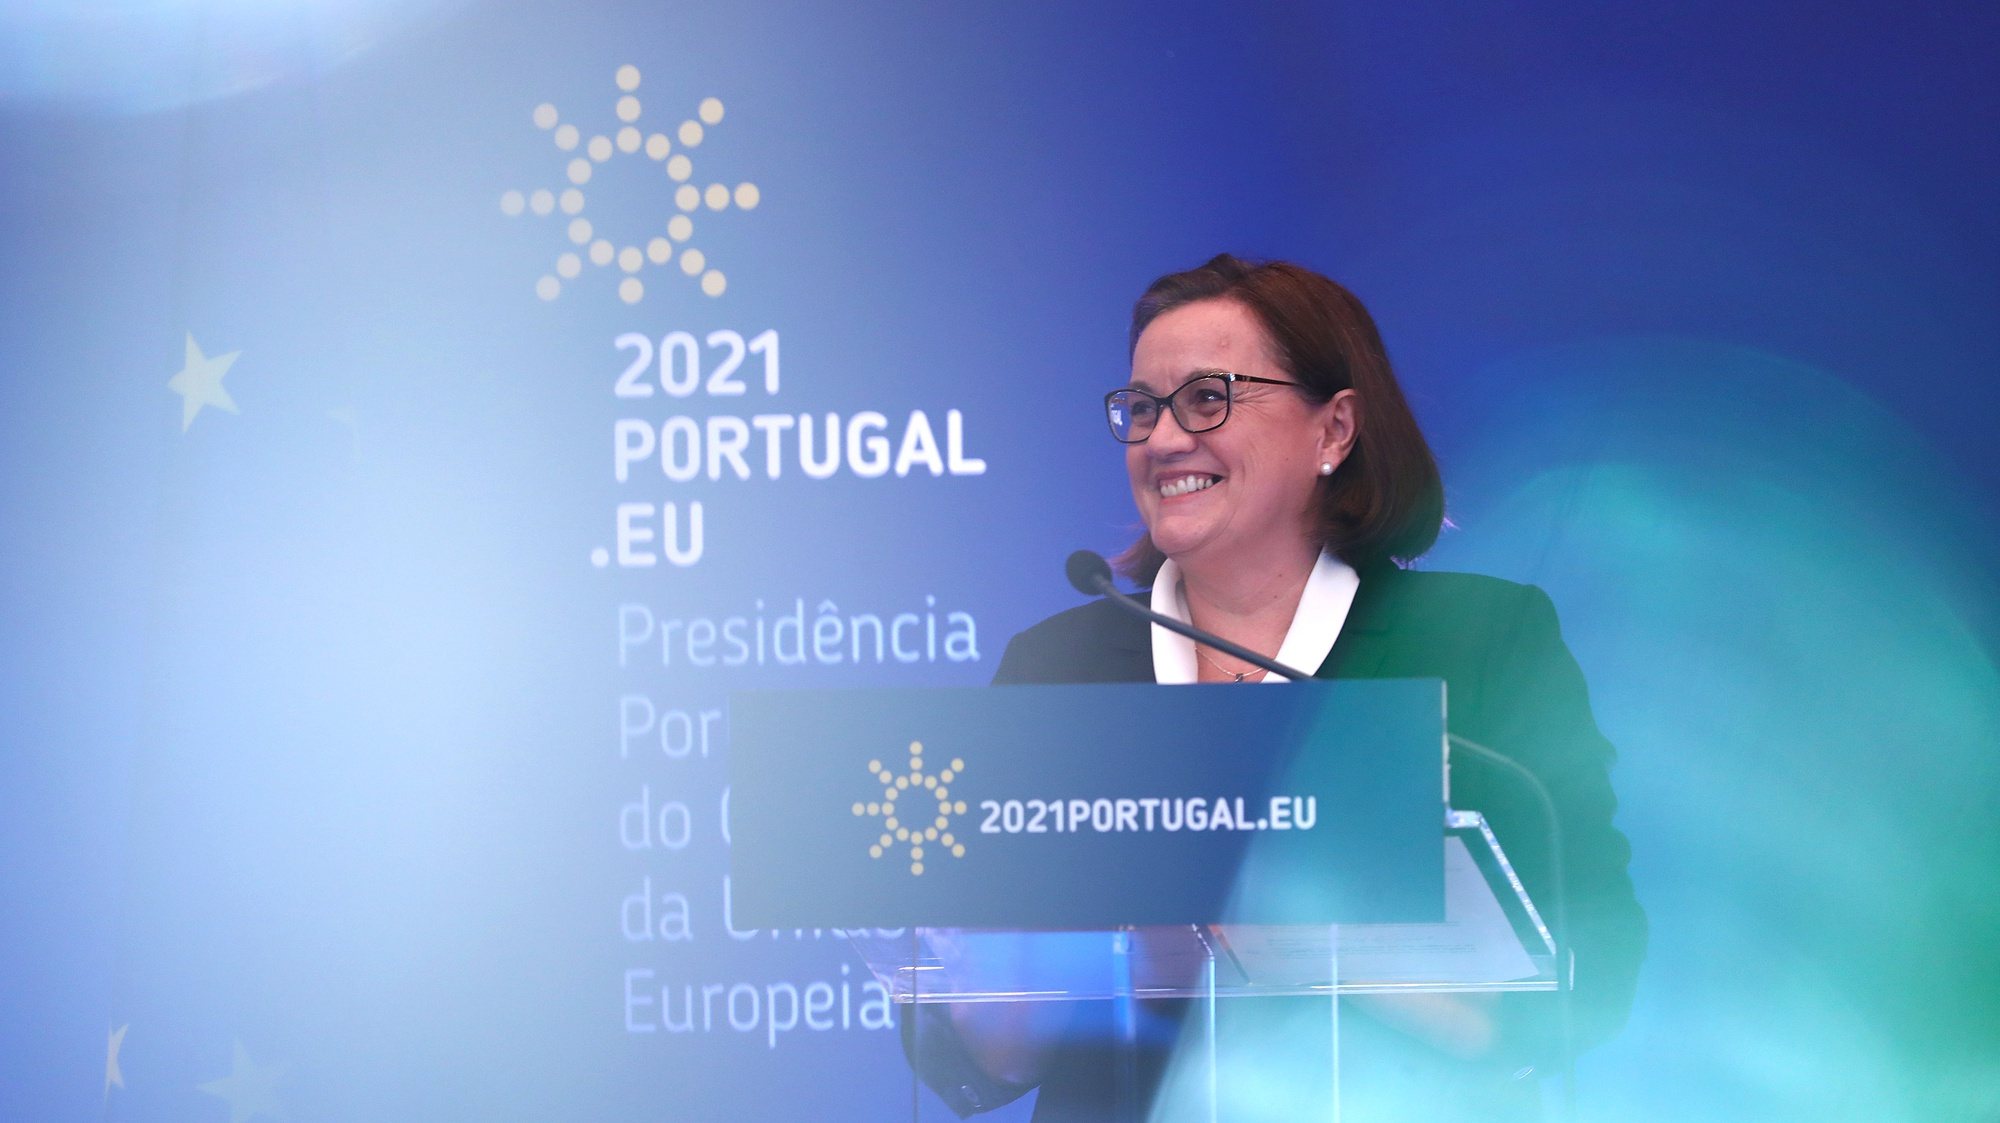 epa09031980 Portuguese Secretary of State for European Affairs, Ana Paula Zacarias, attends a press conference after an Informal video conference of the Ministers of European Affairs, in Lisbon, Portugal, 23 February 2021. Ministers were to exchange views on the European Democracy Action Plan and they will also assess the state of play in EU-UK relations.  EPA/ANTONIO PEDRO SANTOS